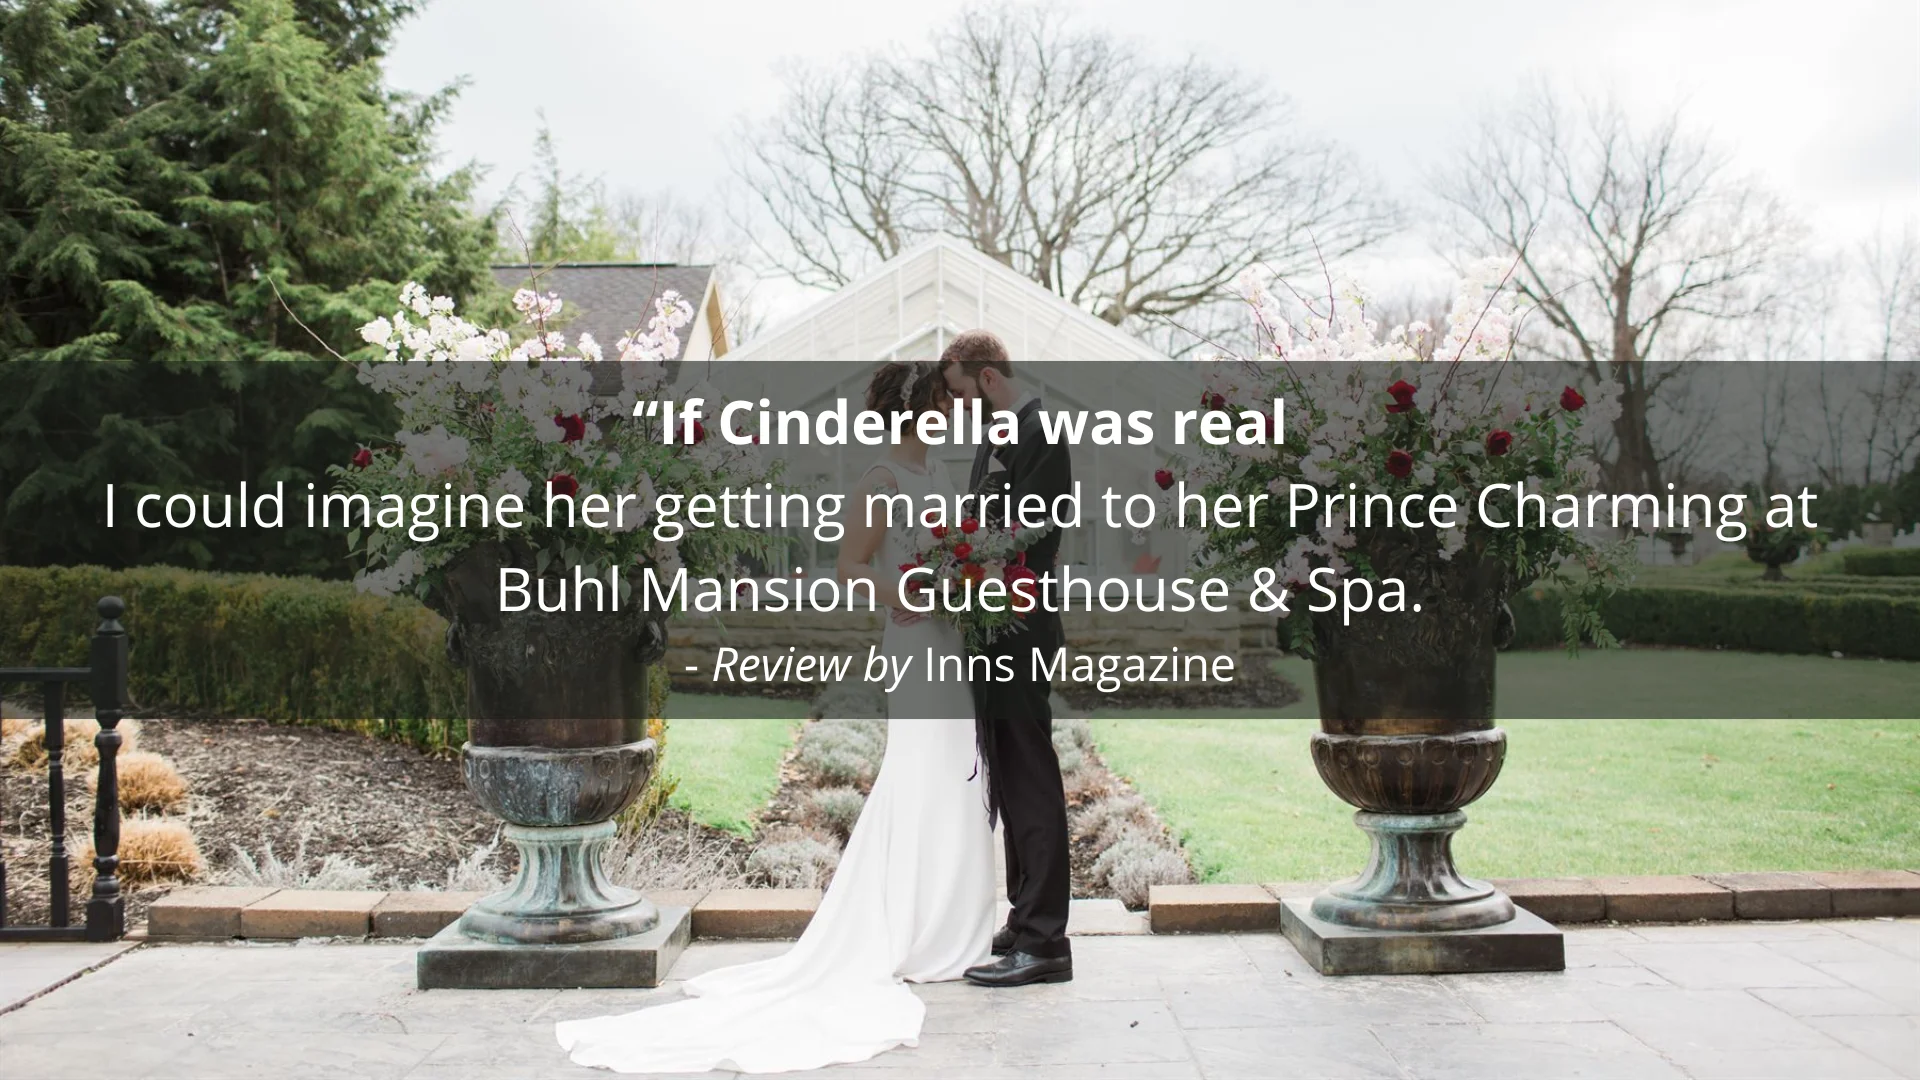 "If Cinderella was real I could imagine her getting married to her Prince Charming at Buhl Mansion Guesthouse & Spa." - Review by Inns Magazine